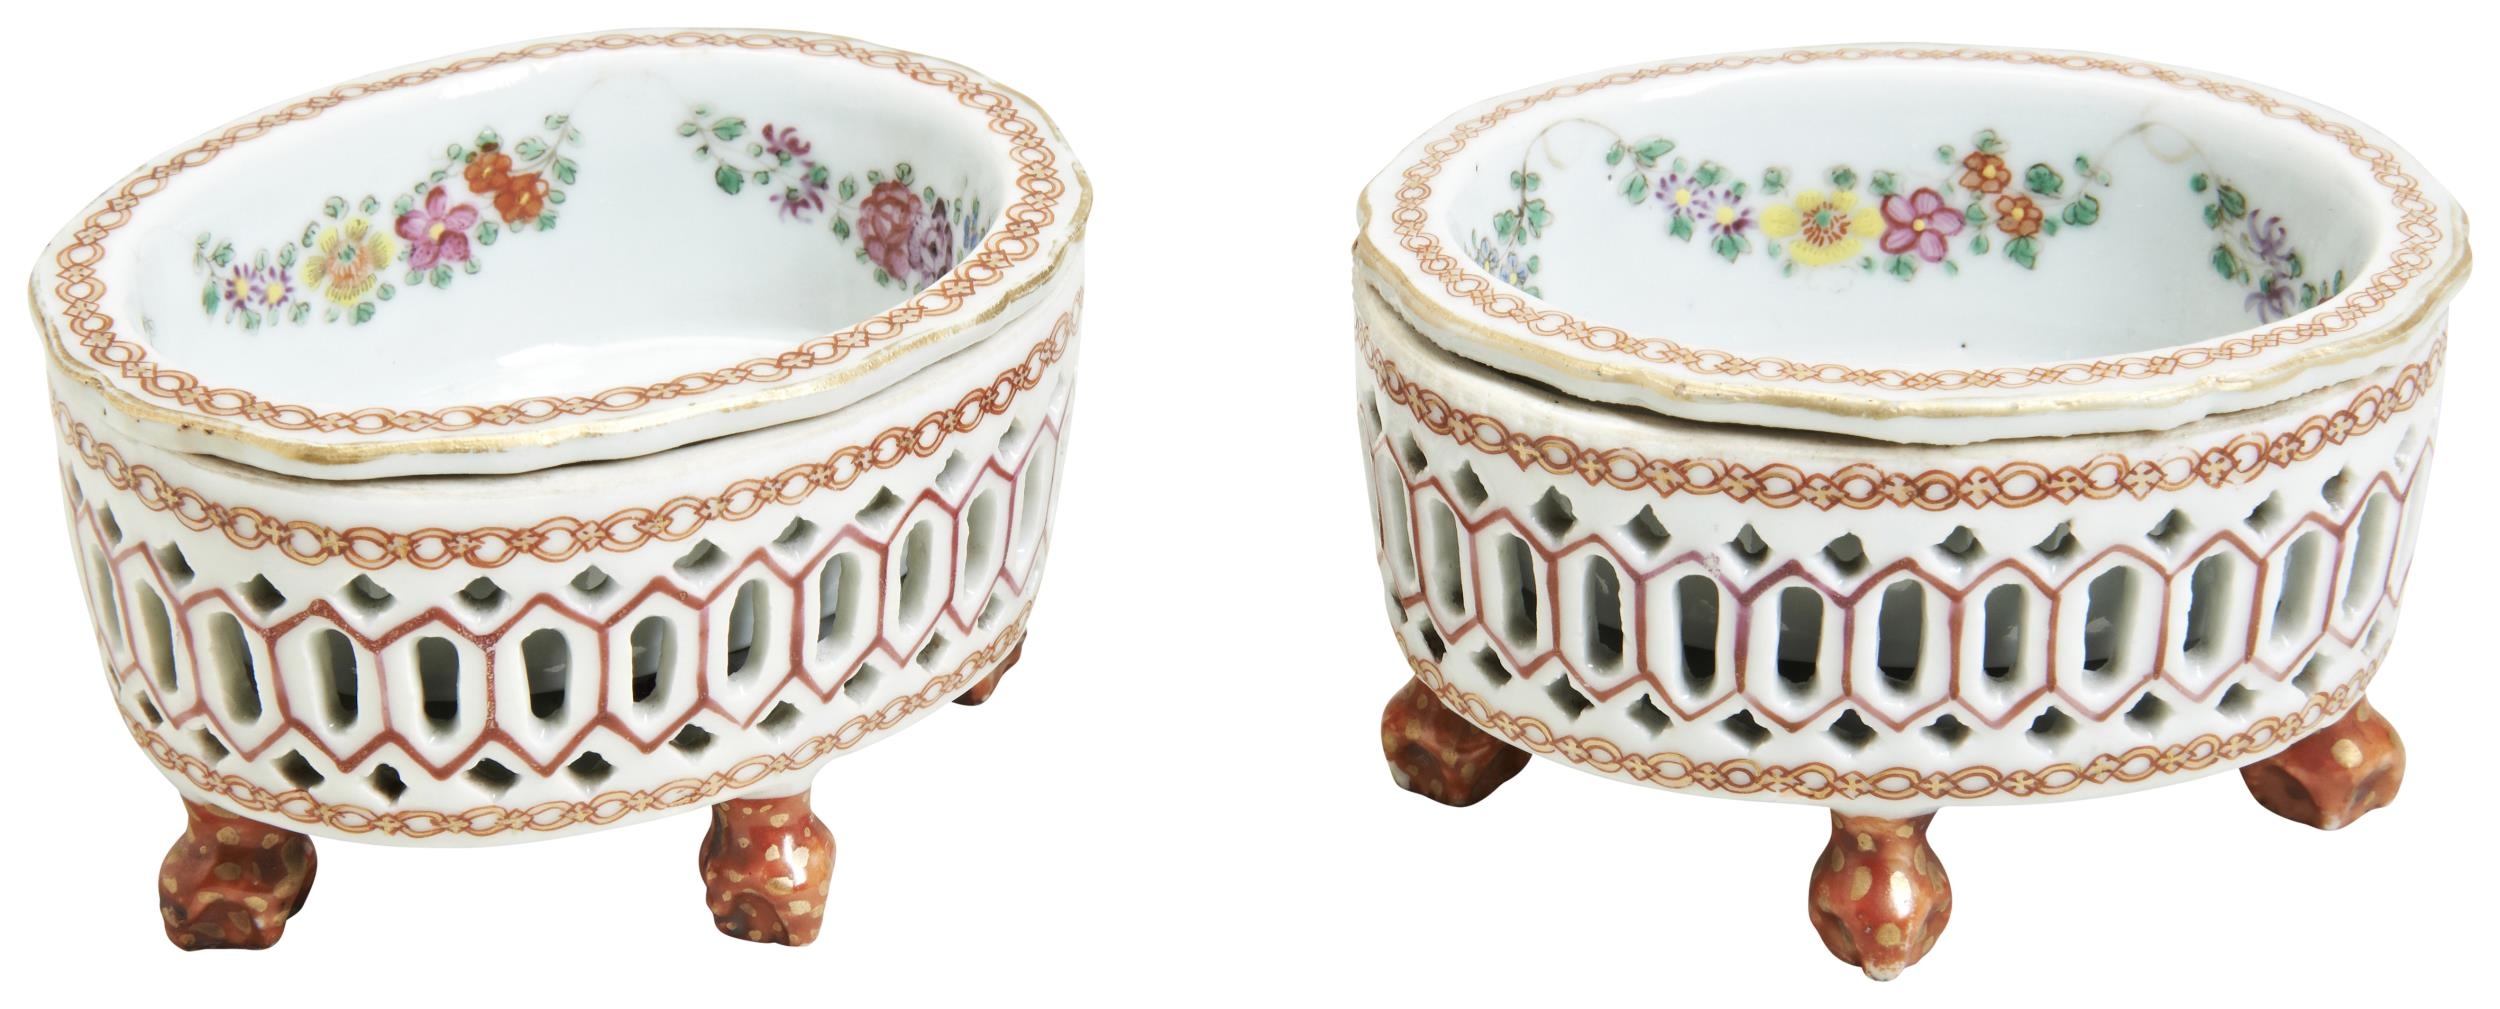 A PAIR OF FAMILLE ROSE EXPORT OVAL RETICULATED SALTS QIANLONG PERIOD (1736-1795) each raised on four